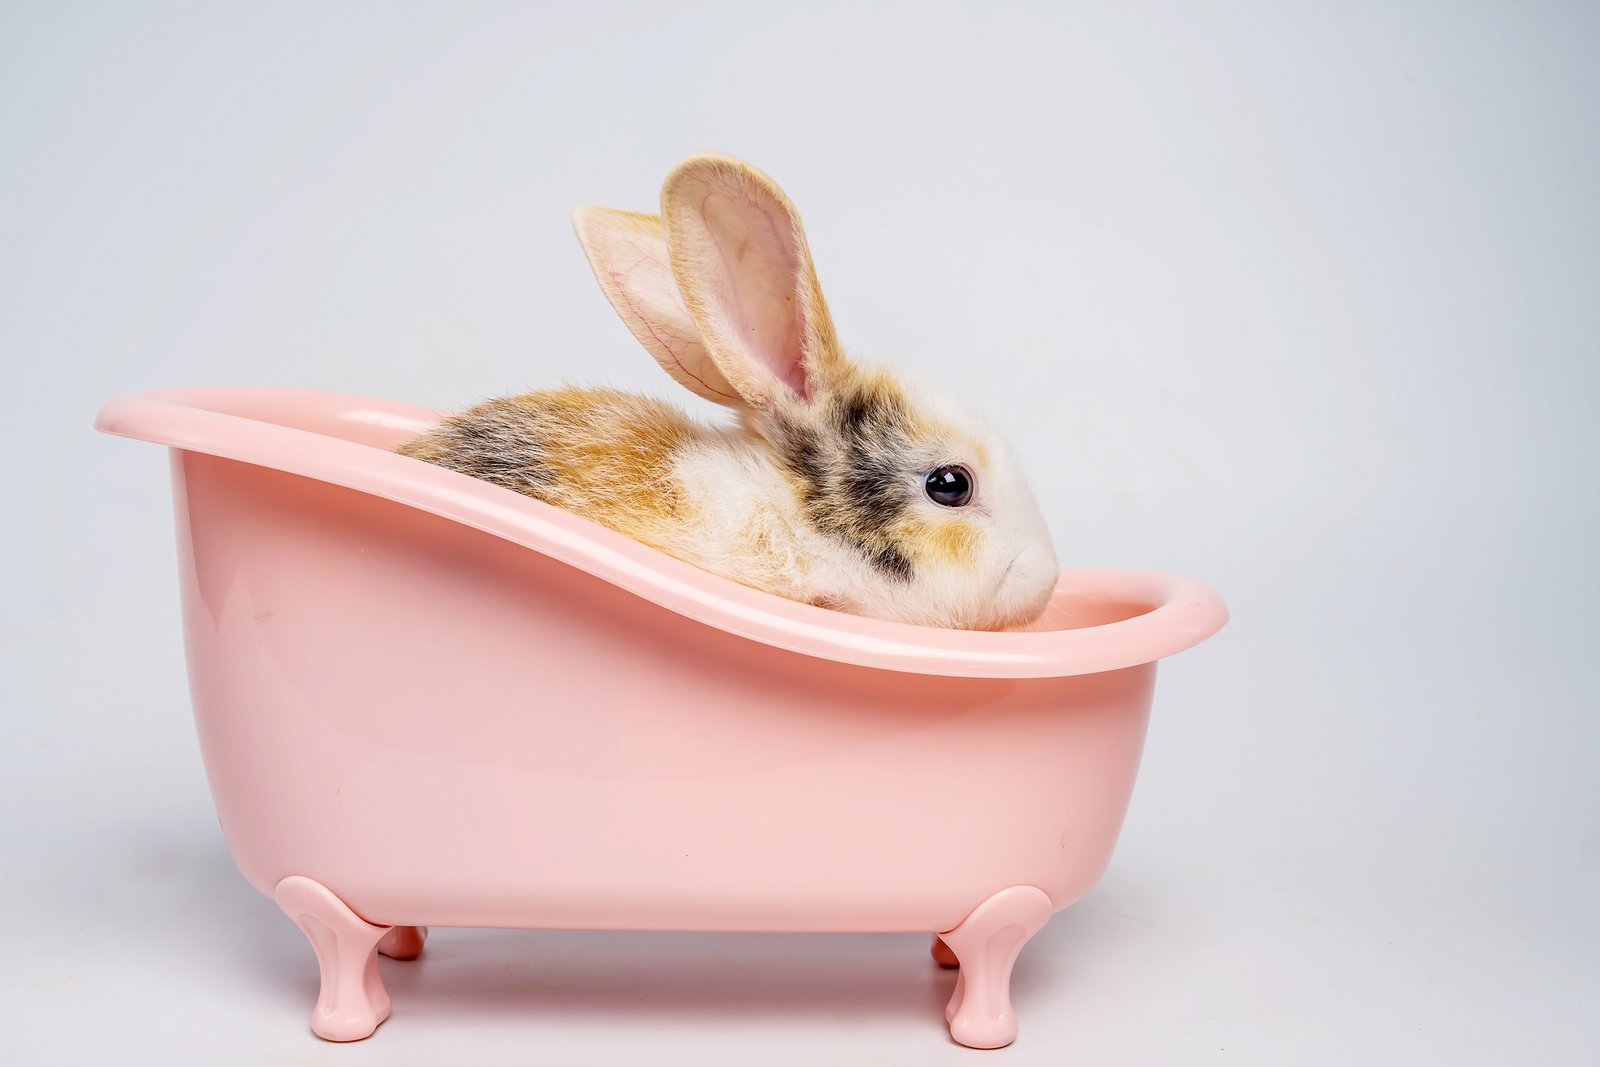 Bunny inside the pink tub